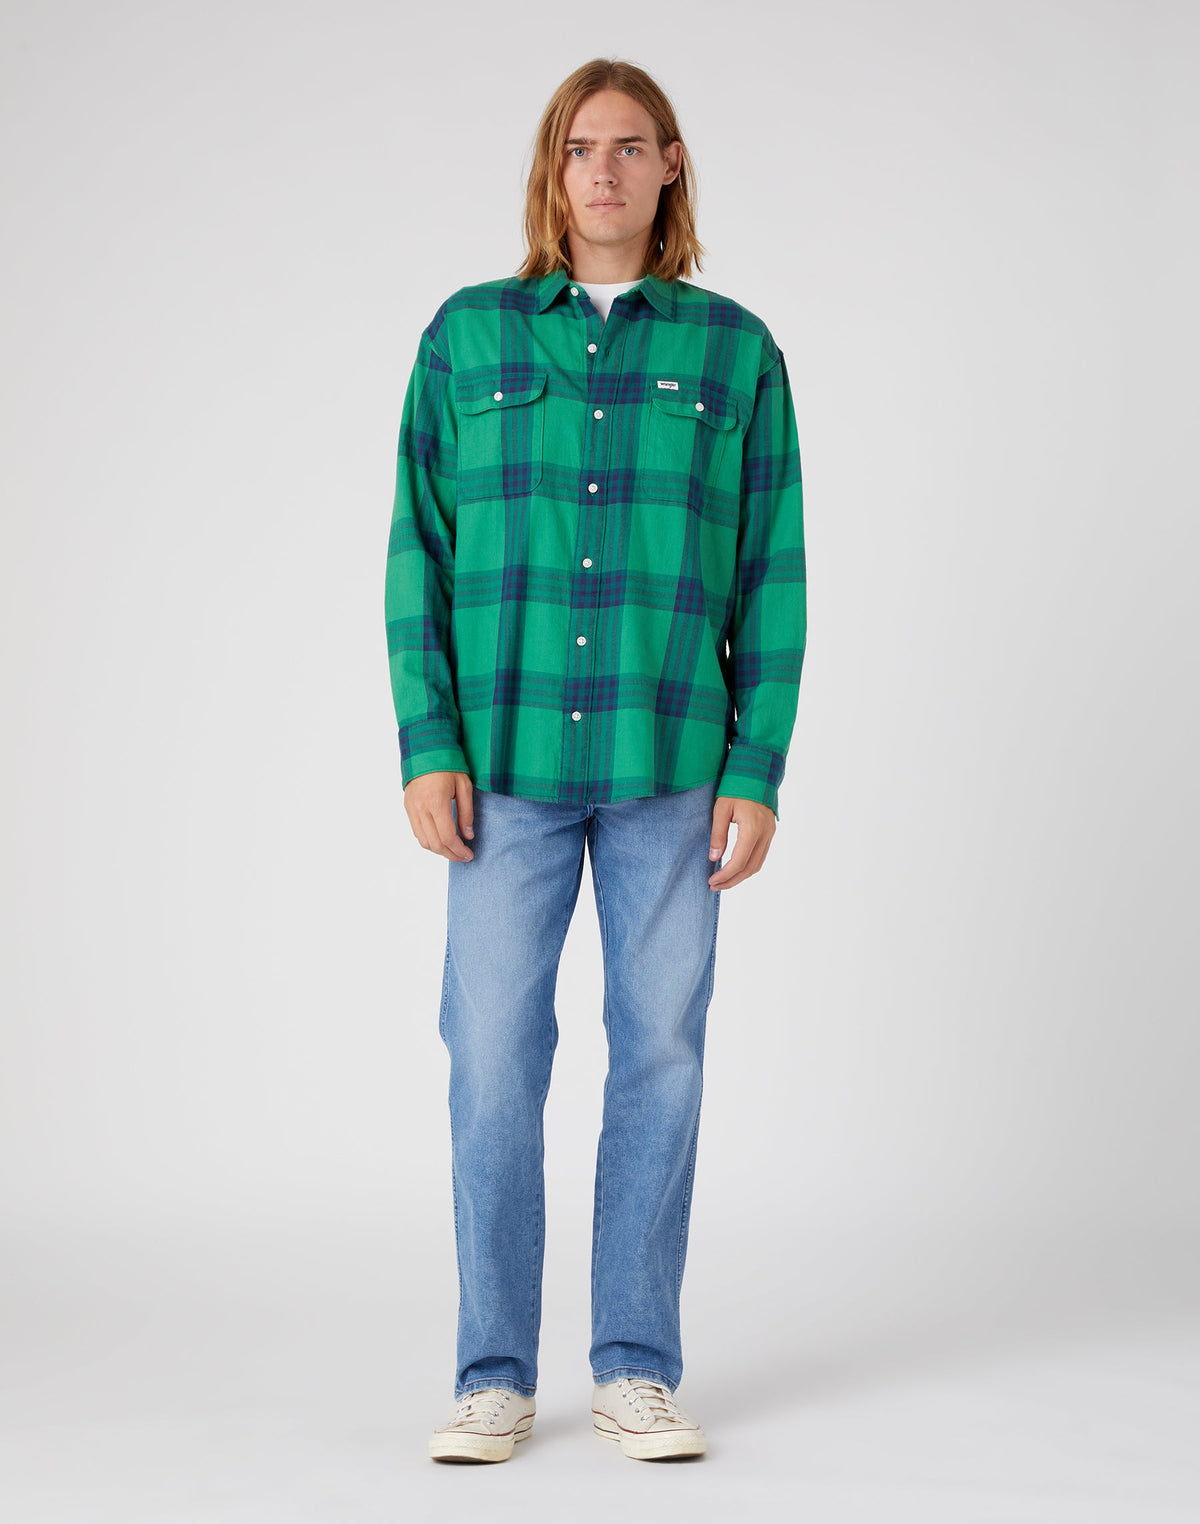 Patch Pocket Shirt in Pine Green